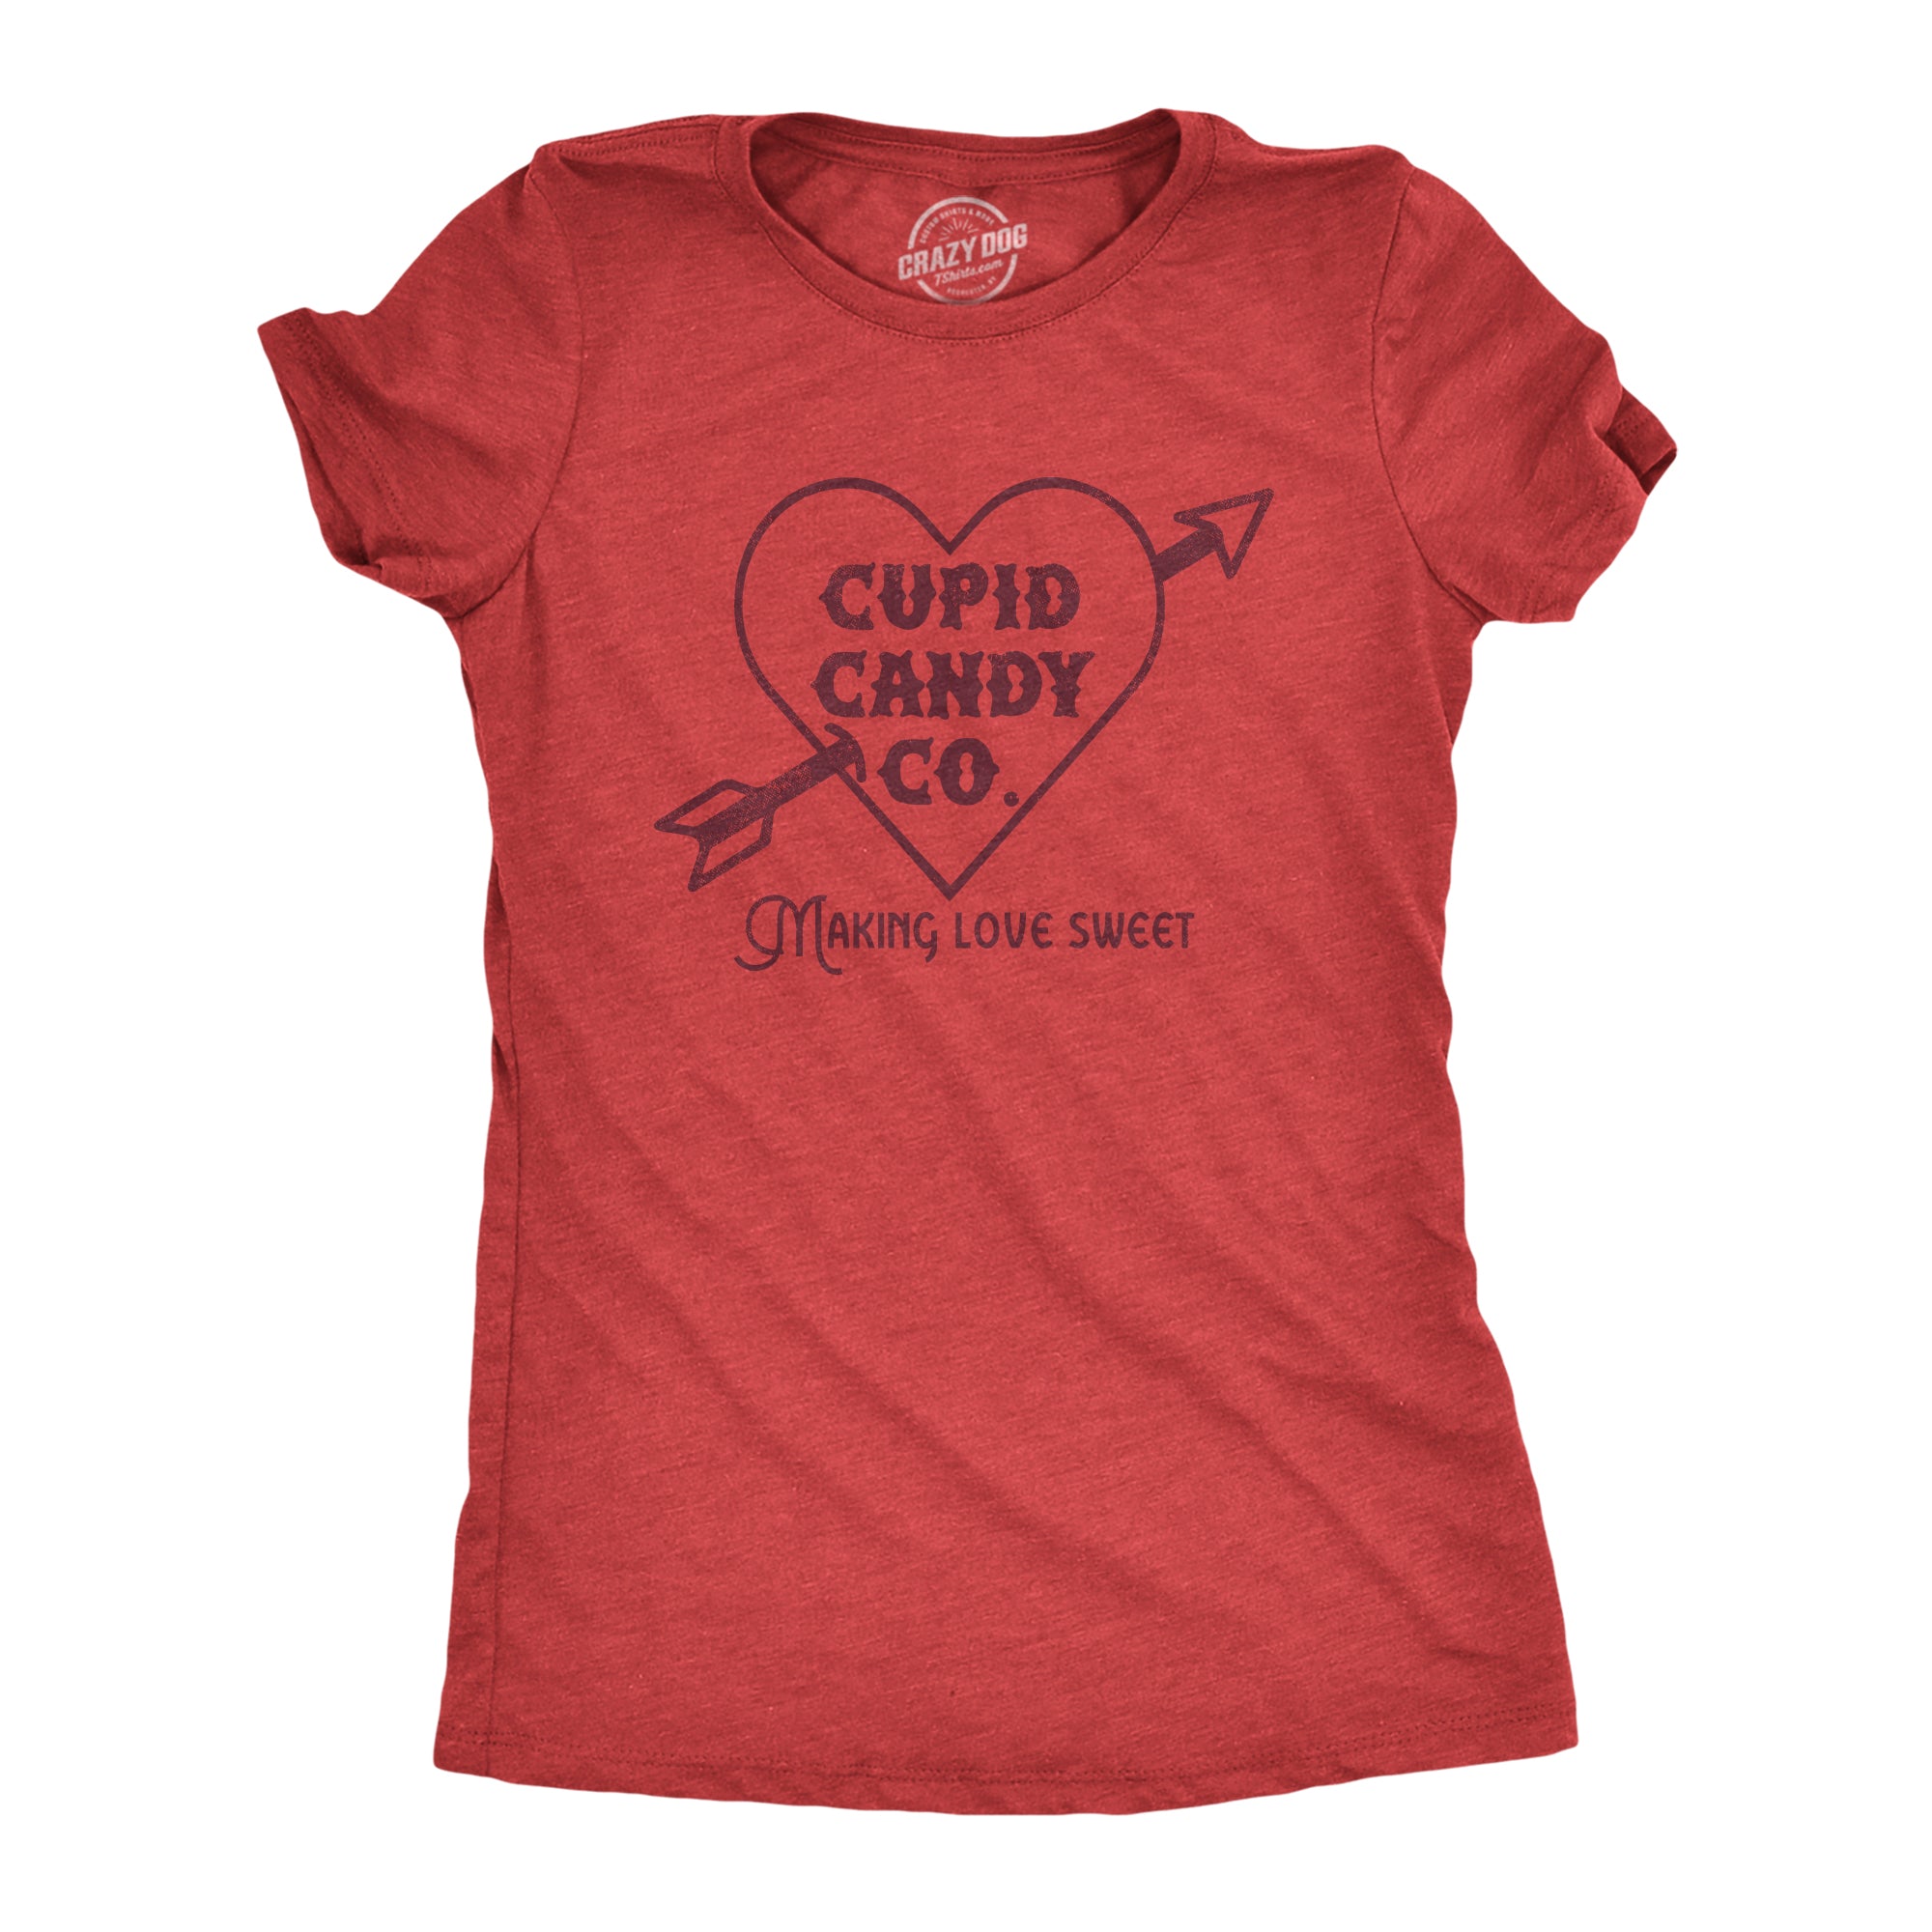 Funny Heather Red - CANDY Cupid Candy Co Womens T Shirt Nerdy Valentine's Day Tee